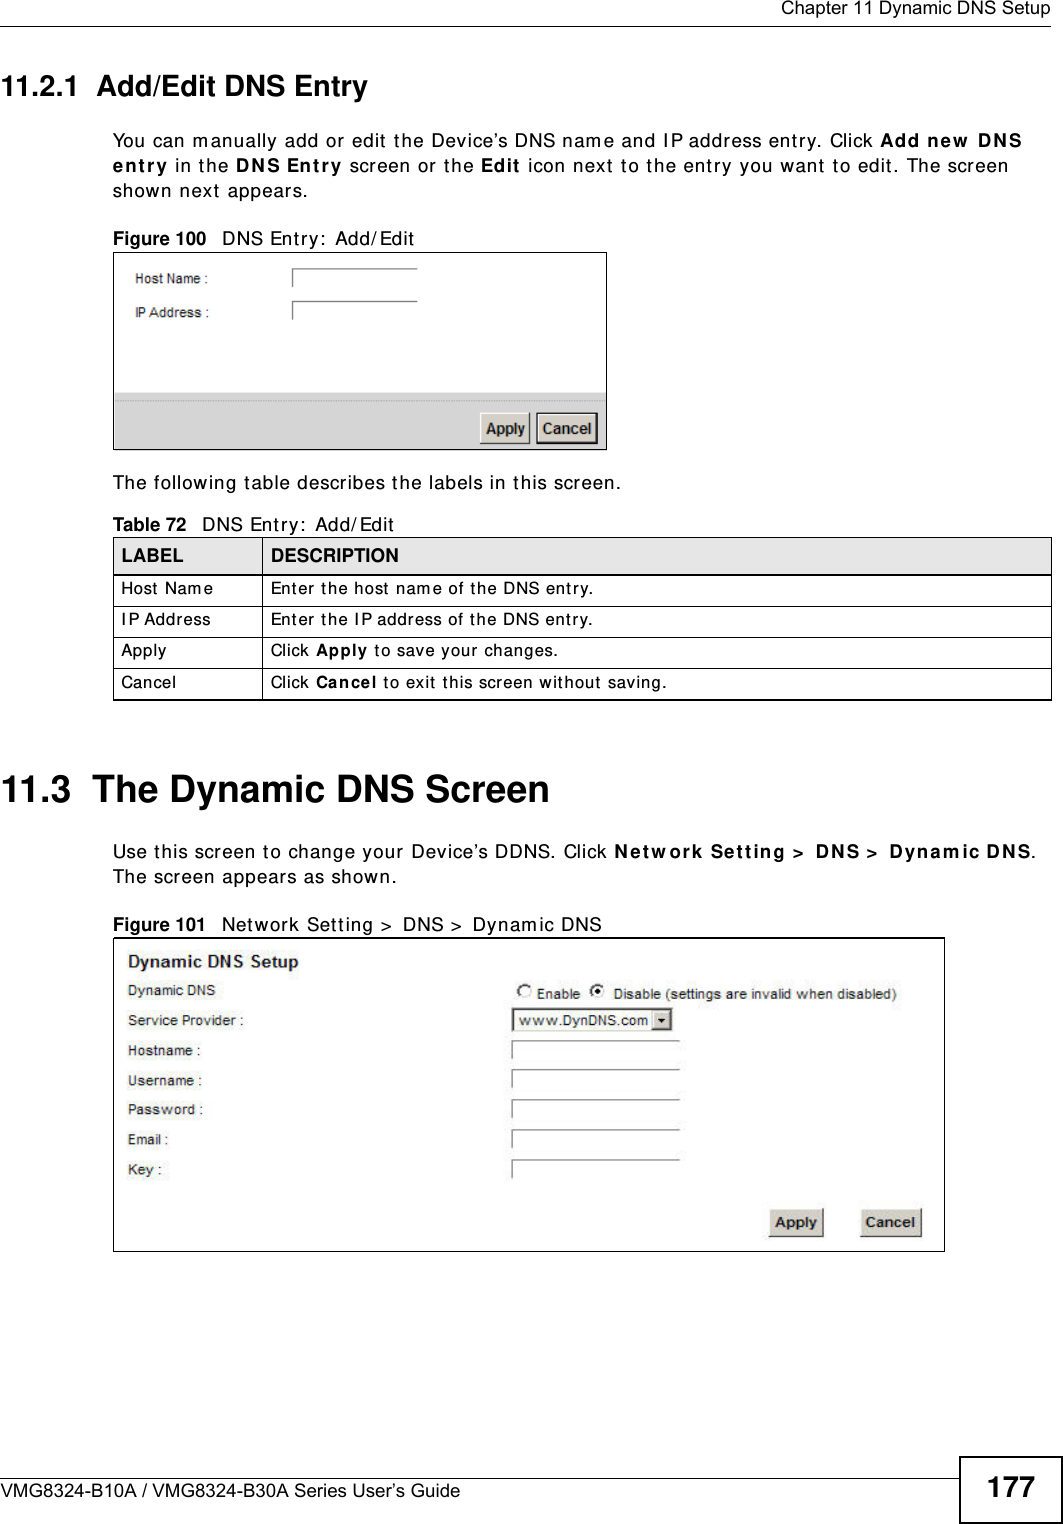  Chapter 11 Dynamic DNS SetupVMG8324-B10A / VMG8324-B30A Series User’s Guide 17711.2.1  Add/Edit DNS EntryYou can m anually add or edit  t he Device’s DNS nam e and I P address ent ry. Click Add ne w  D N S e nt r y  in t he DN S Ent r y screen or the Ed it  icon next  to the ent ry you want  t o edit . The screen shown next  appears.Figure 100   DNS Ent ry :  Add/ EditThe following t able describes t he labels in this screen. 11.3  The Dynamic DNS ScreenUse t his scr een t o change your Device’s DDNS. Click N e t w or k  Set t ing &gt;  D N S &gt;  Dyn a m ic DN S. The screen appears as shown.Figure 101   Network Sett ing &gt;  DNS &gt;  Dynam ic DNSTable 72   DNS Ent ry:  Add/ EditLABEL DESCRIPTIONHost Nam e Enter t he host  nam e of t he DNS ent ry.I P Address Enter t he I P address of t he DNS entry.Apply Click Apply t o save your changes.Cancel Click Ca nce l to exit this screen without saving.